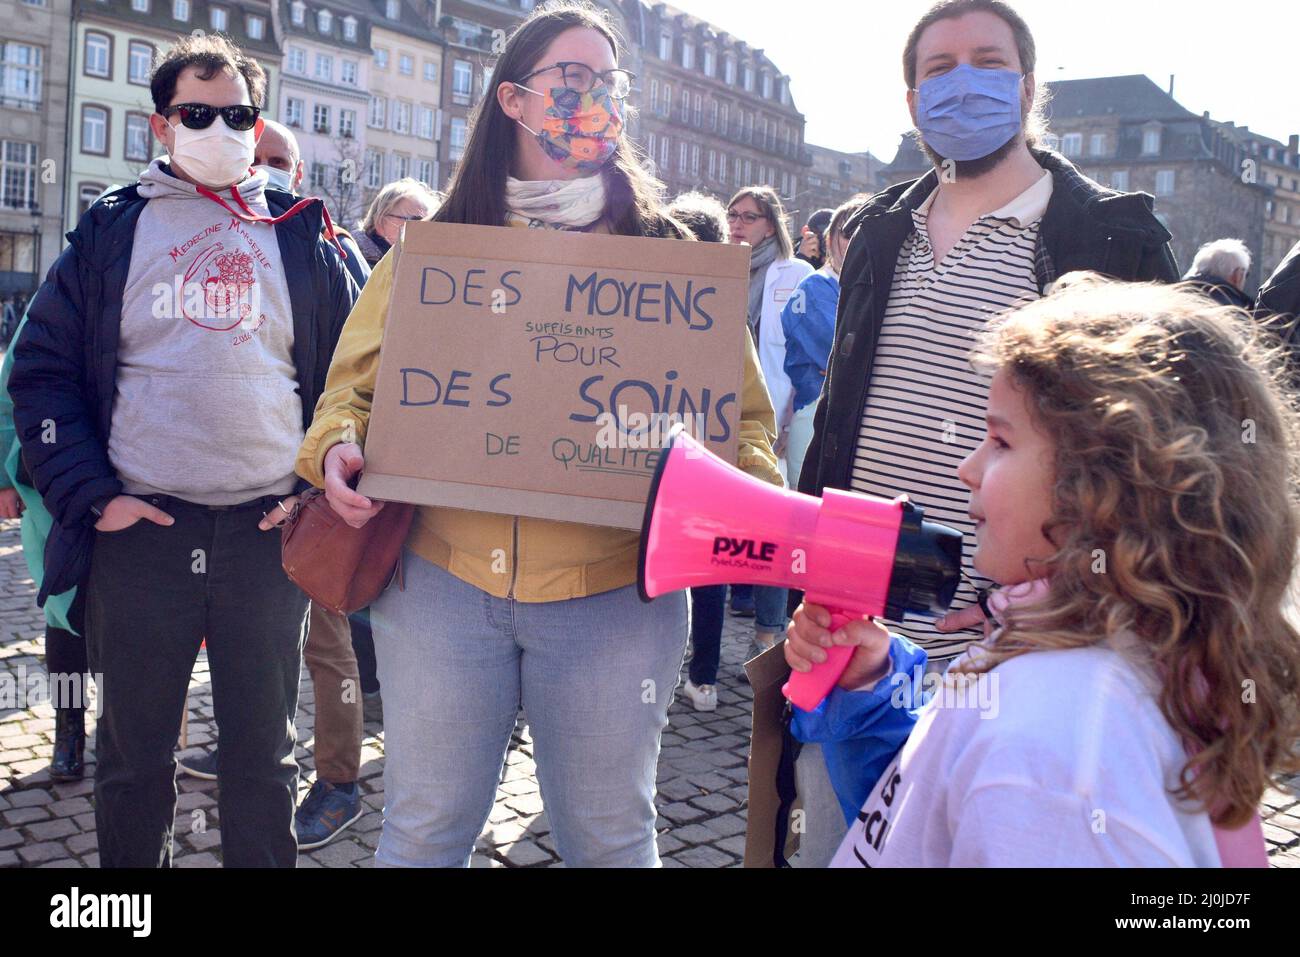 March for Health, health workers demonstrate to denounce the lack of staff in the services and the constant problems in the public hospital. The Segur of Health is criticized, the changes are not sufficient, and the debt of the hospitals is constantly increasing. March 19, 2022, in Strasbourg Northeastern France. Photo by Nicolas Roses/ABACAPRESS.COM Stock Photo